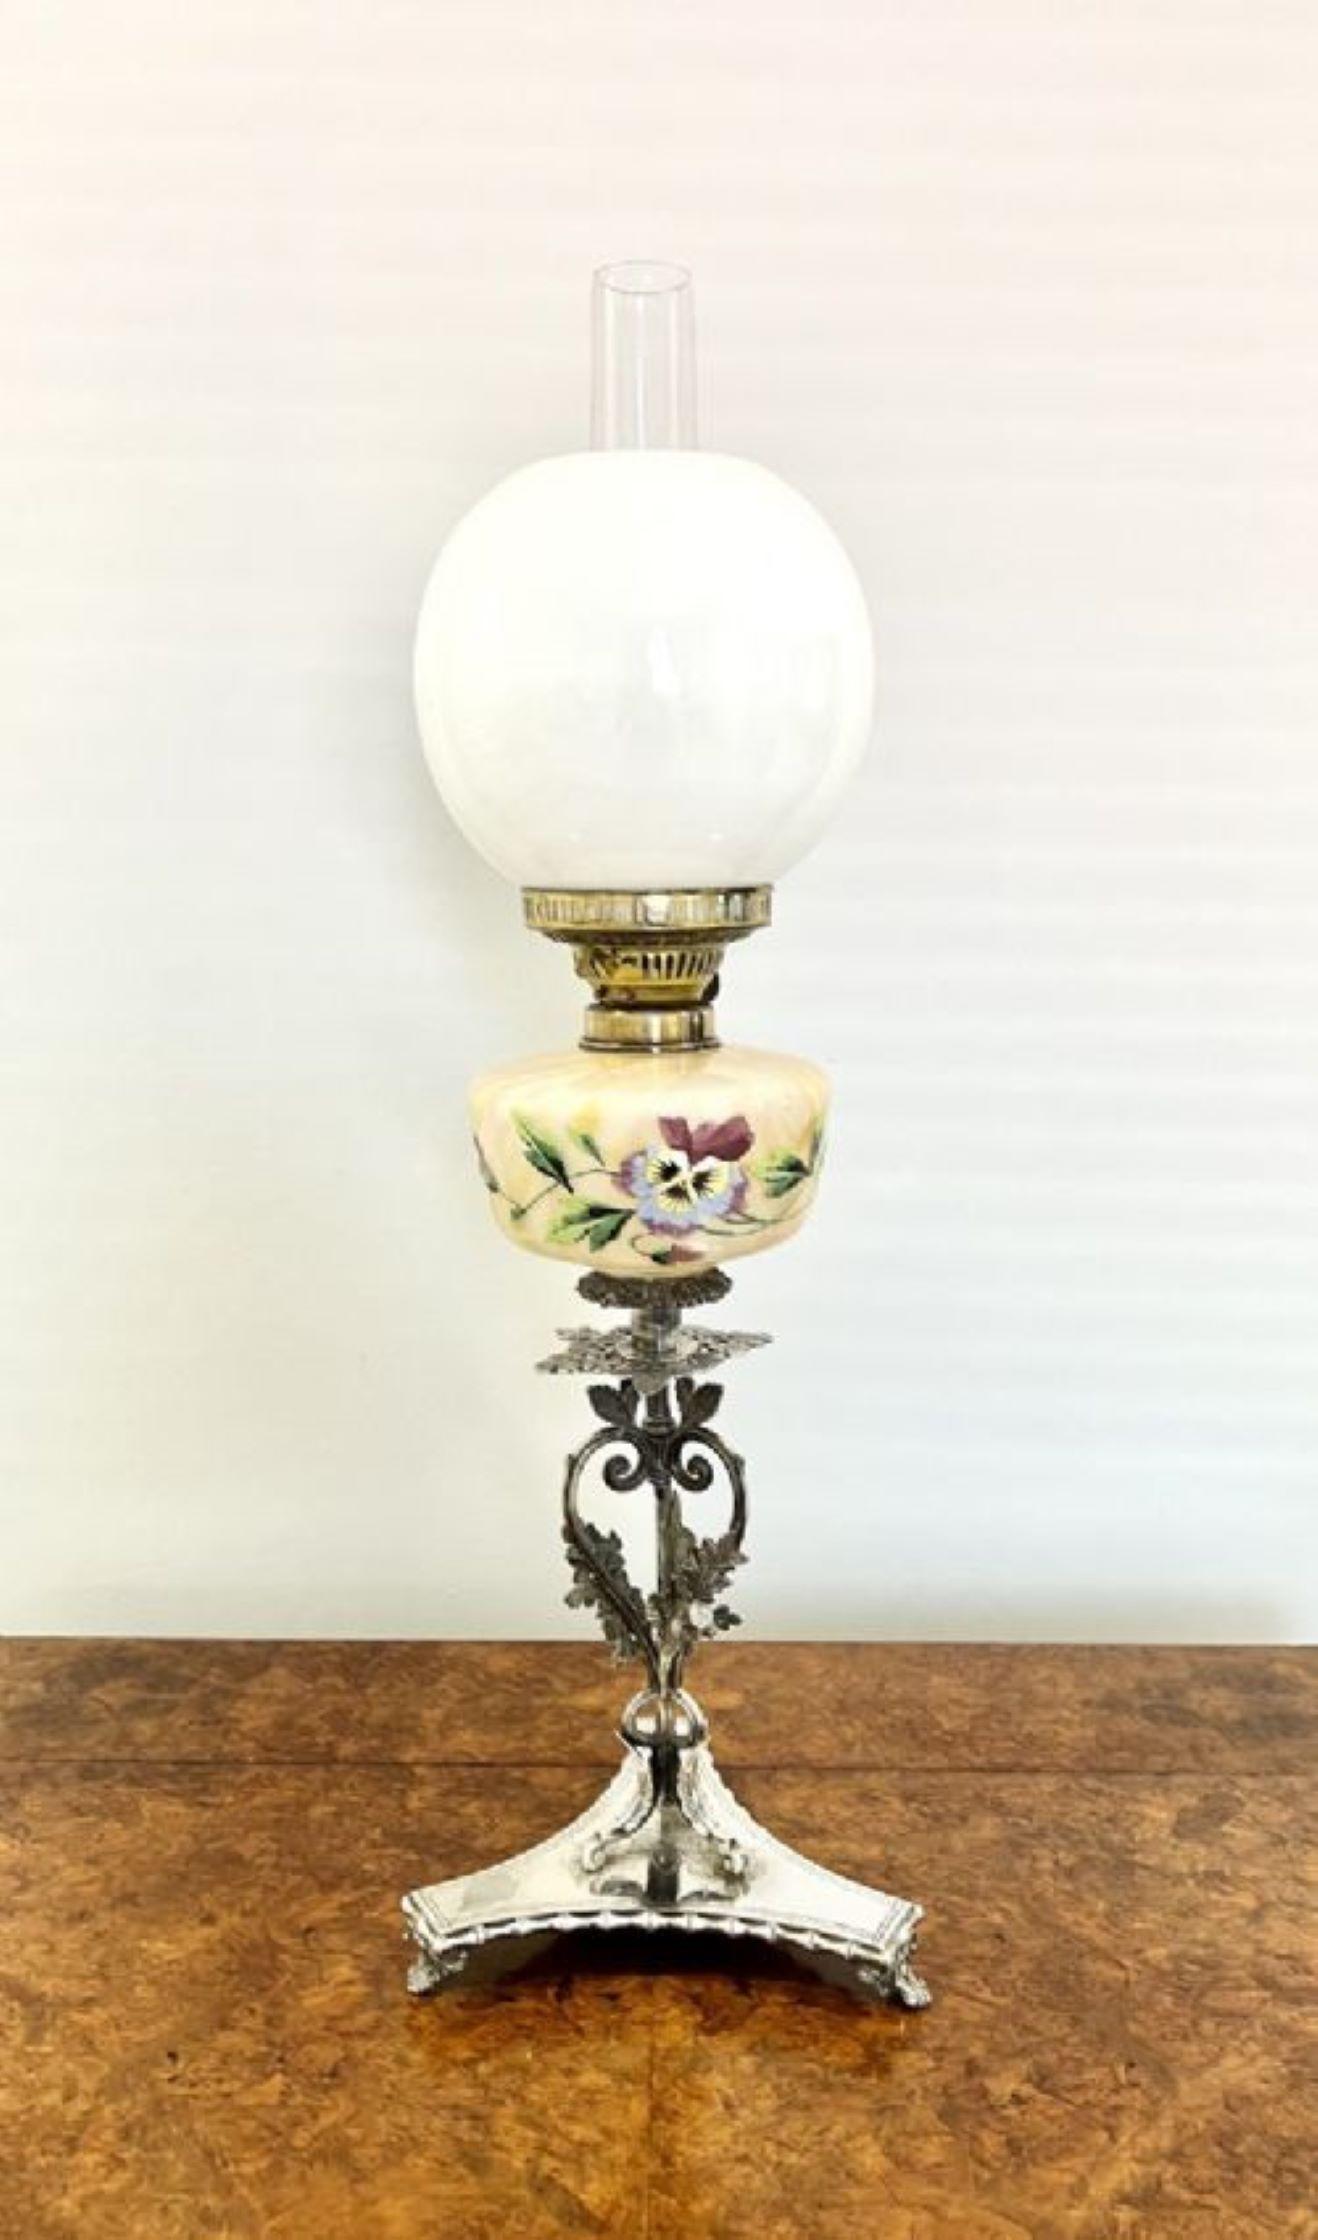 Unusual antique Victorian quality ornate silver plated oil lamp having a quality white glass shade, with a brass double burner, unusual hand painted yellow glass font with a wonderful floral decoration in green, purple and blue colours, with a